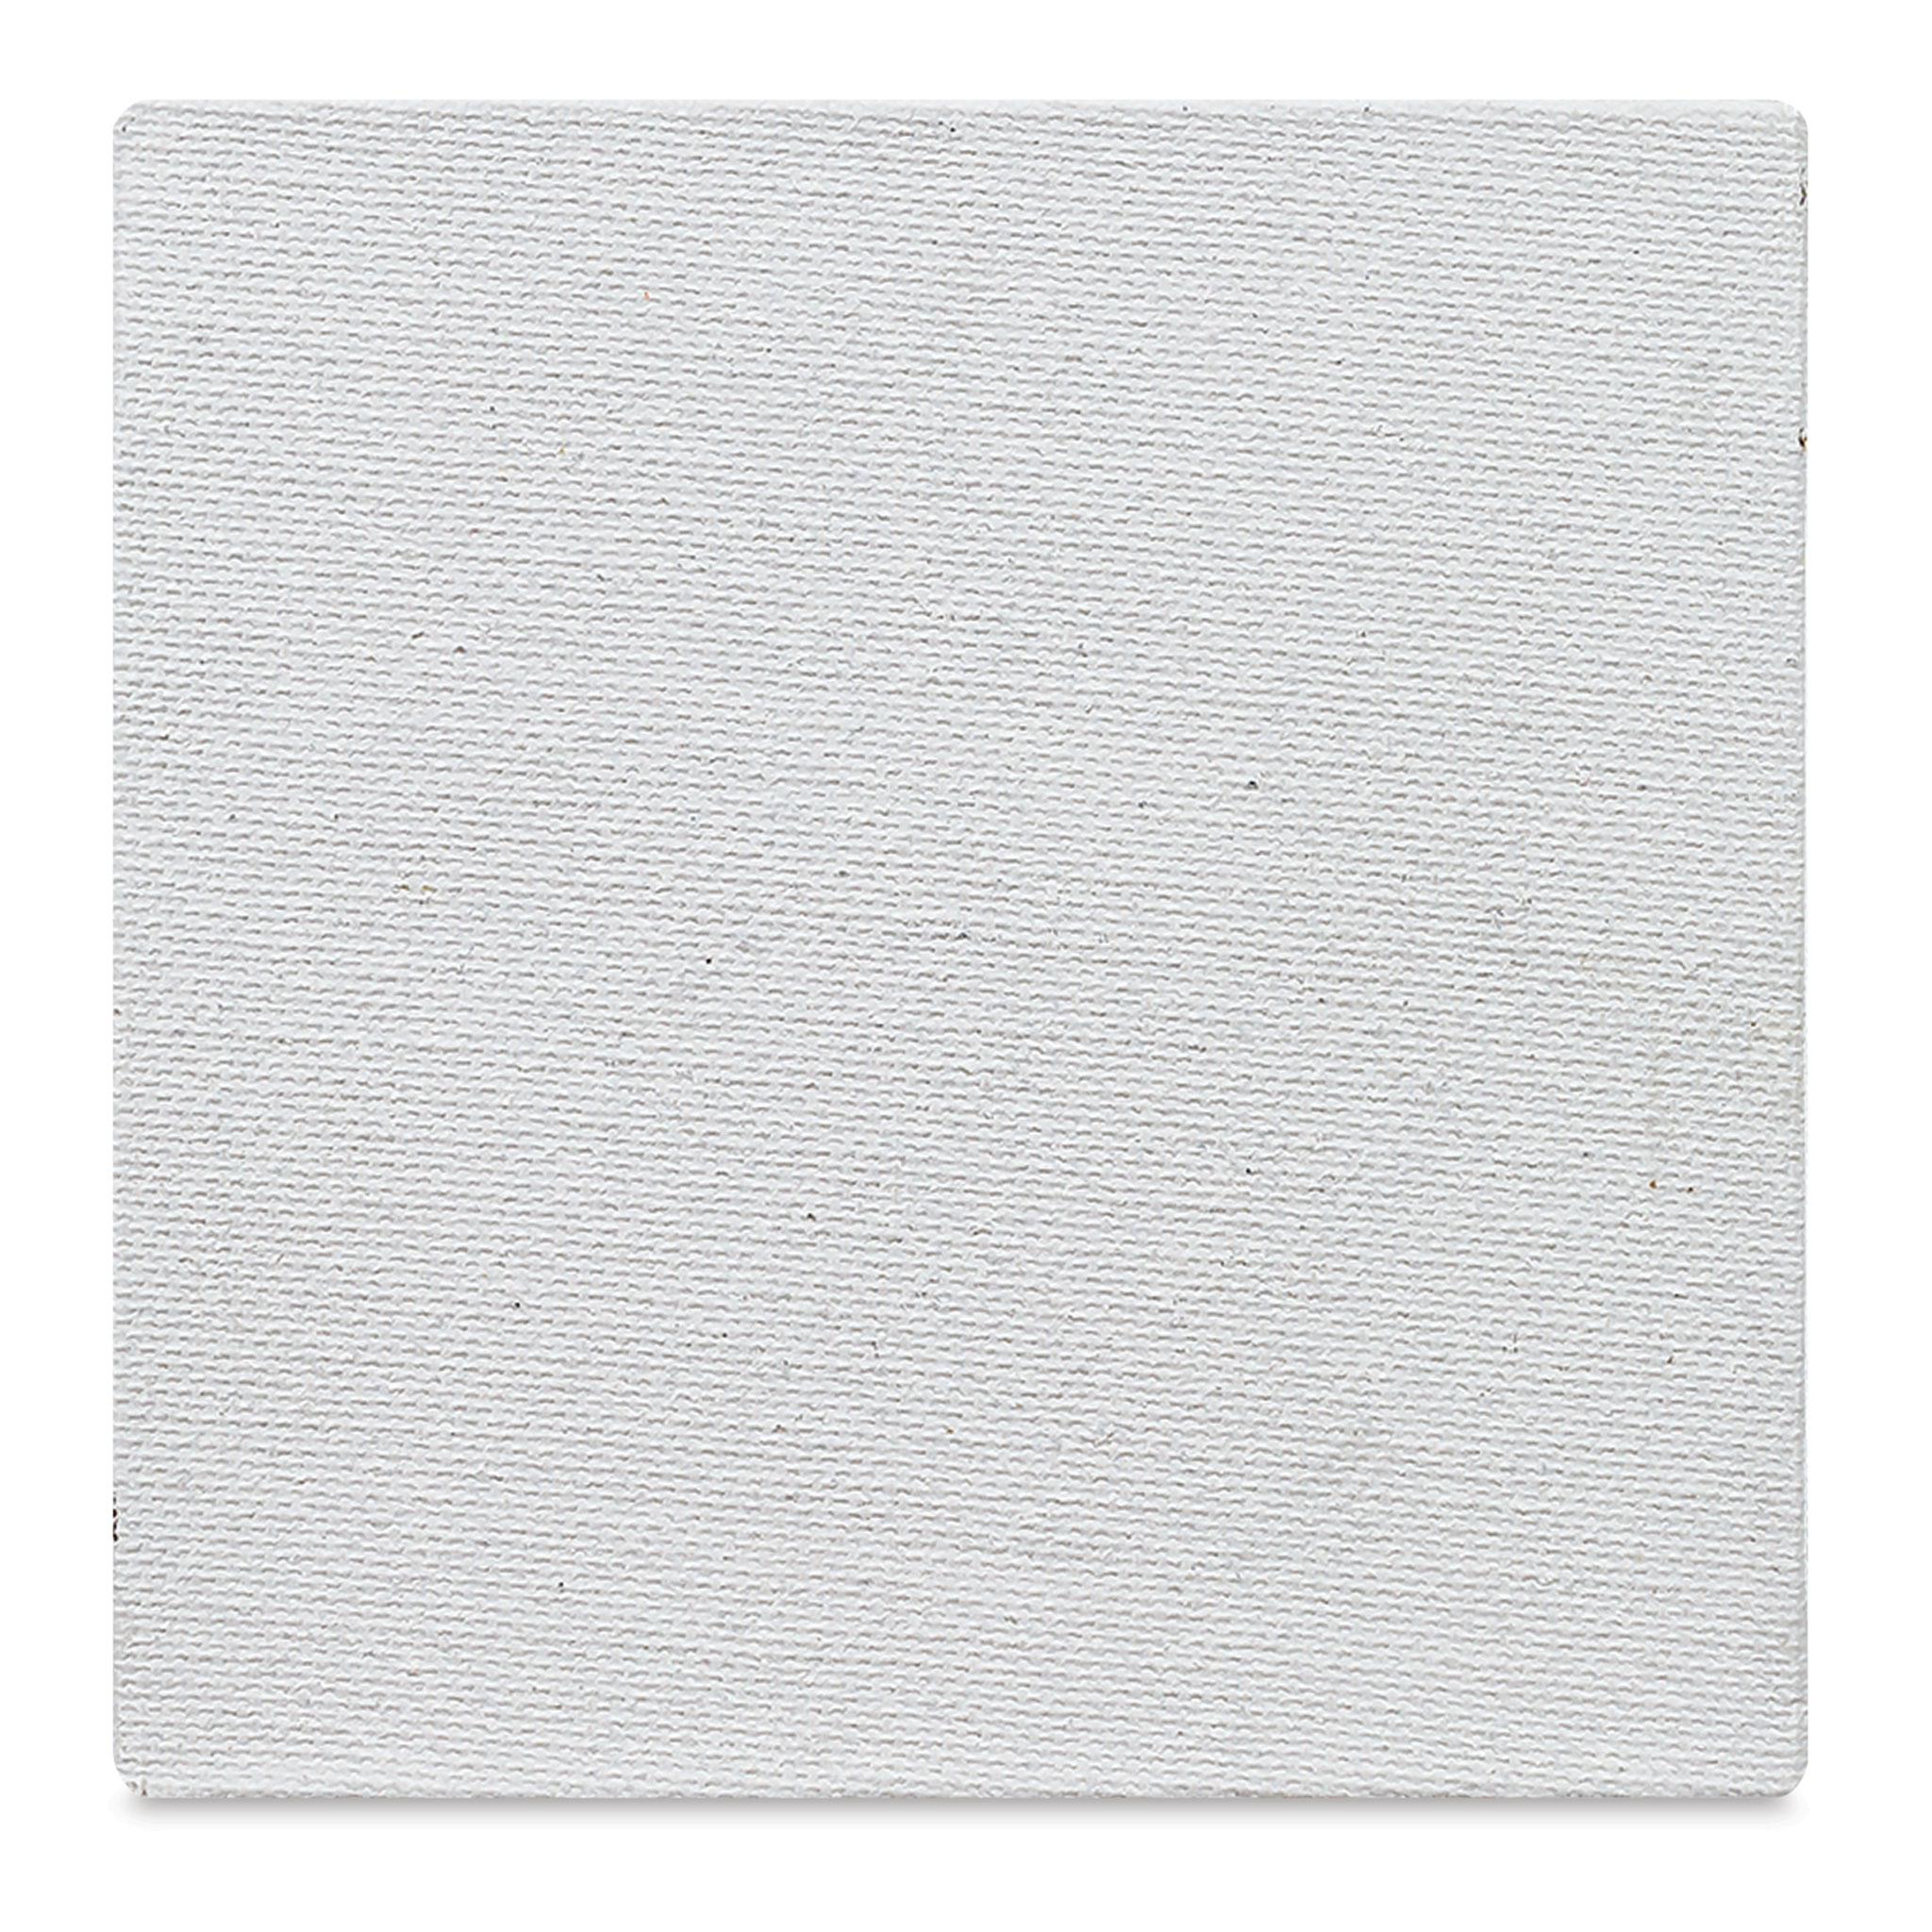 Blick Super Value Canvas Pack - 11 inch x 14 inch, Pkg of 7, White